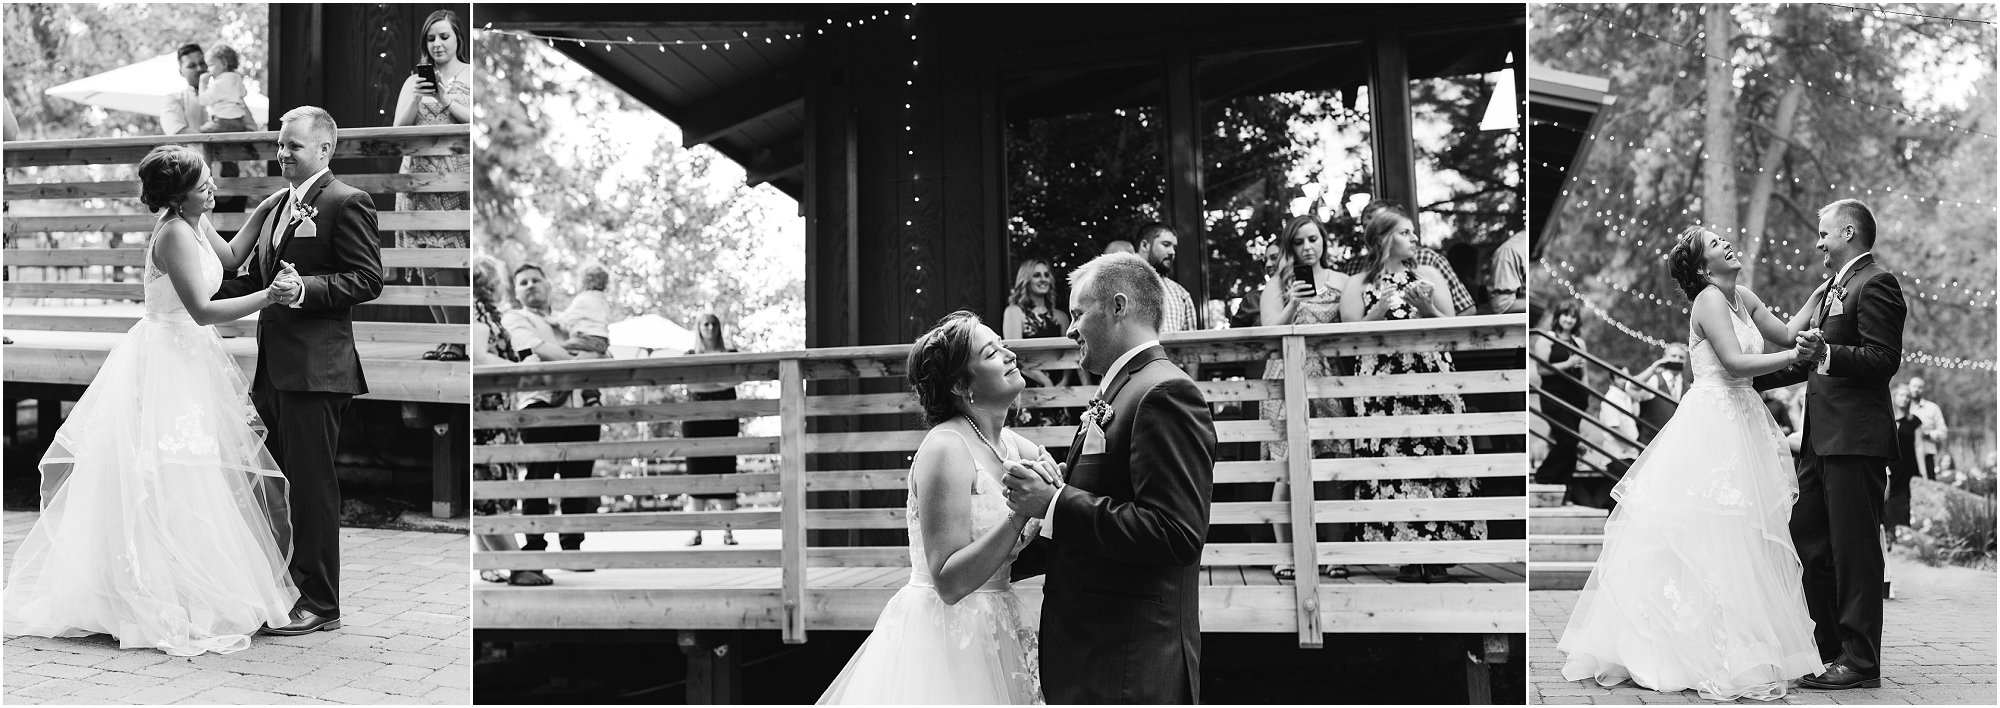 A gorgeous black and white photo of the wedding couple enjoying their first dance at the Rock Springs Ranch wedding venue outside of Bend, OR. | Erica Swantek Photography